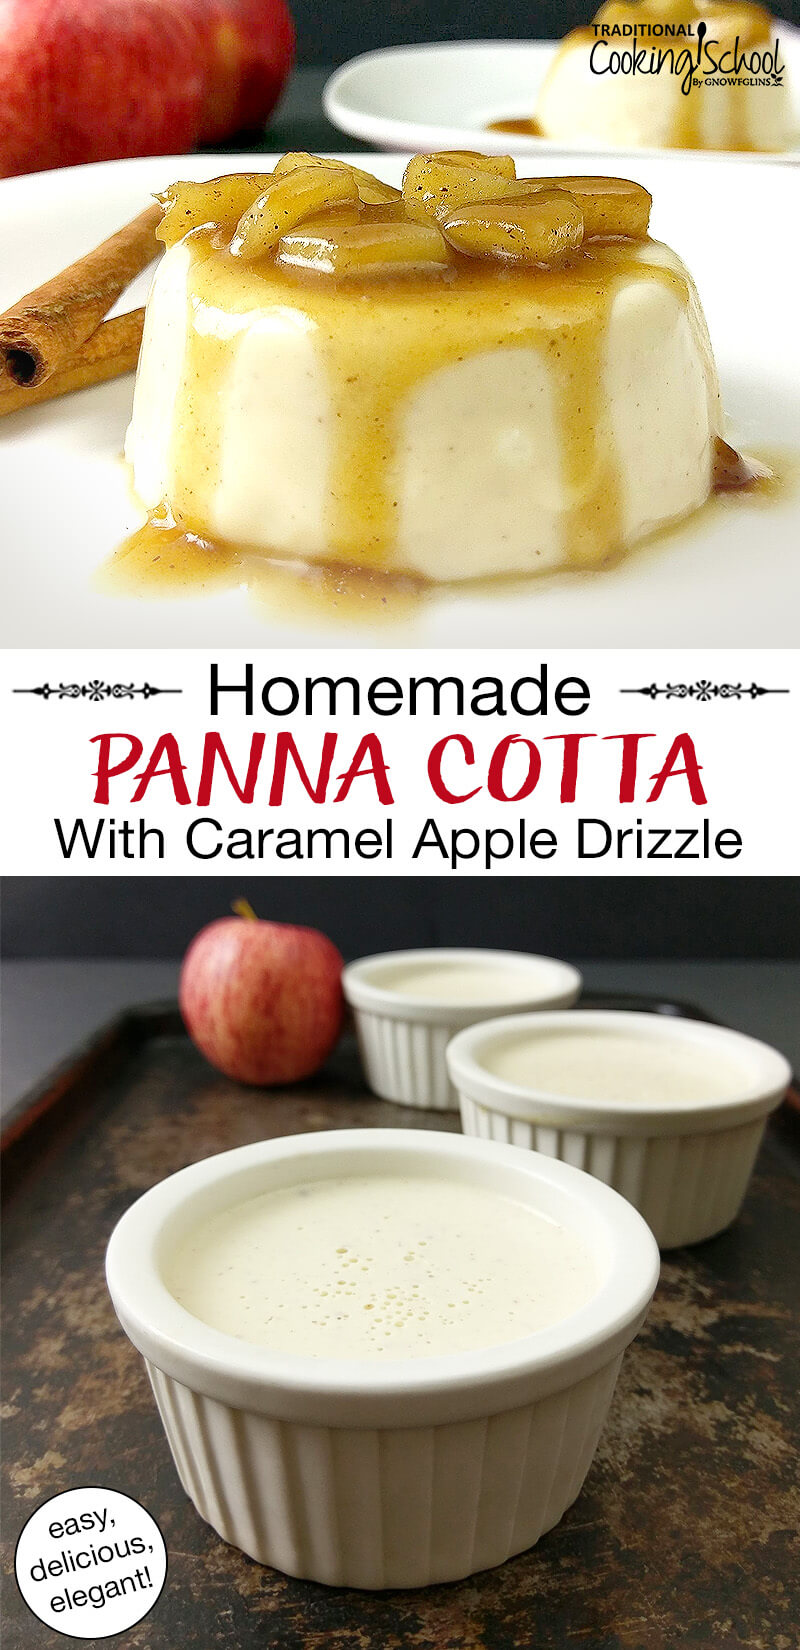 Photo collage of panna cotta, in small ceramic bowls on a tray, and presented on a plate topped with sauteed apple chunks and a caramel sauce. Text overlay says: "Homemade Panna Cotta With Caramel Apple Drizzle (easy, delicious, elegant!)"